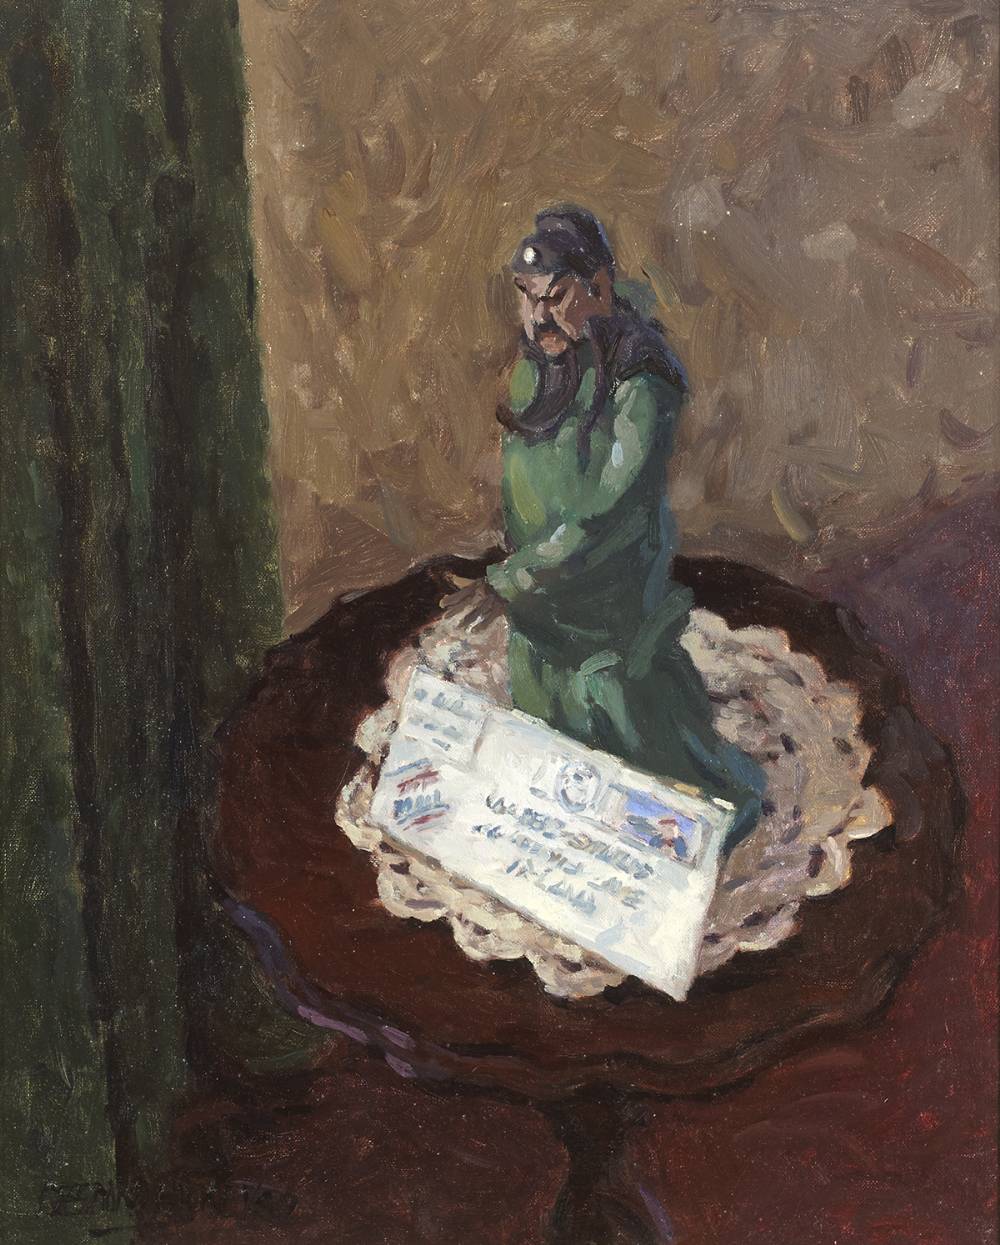 LETTER FOR GERTIE, 1989 by Desmond Hickey (1937-2007) at Whyte's Auctions